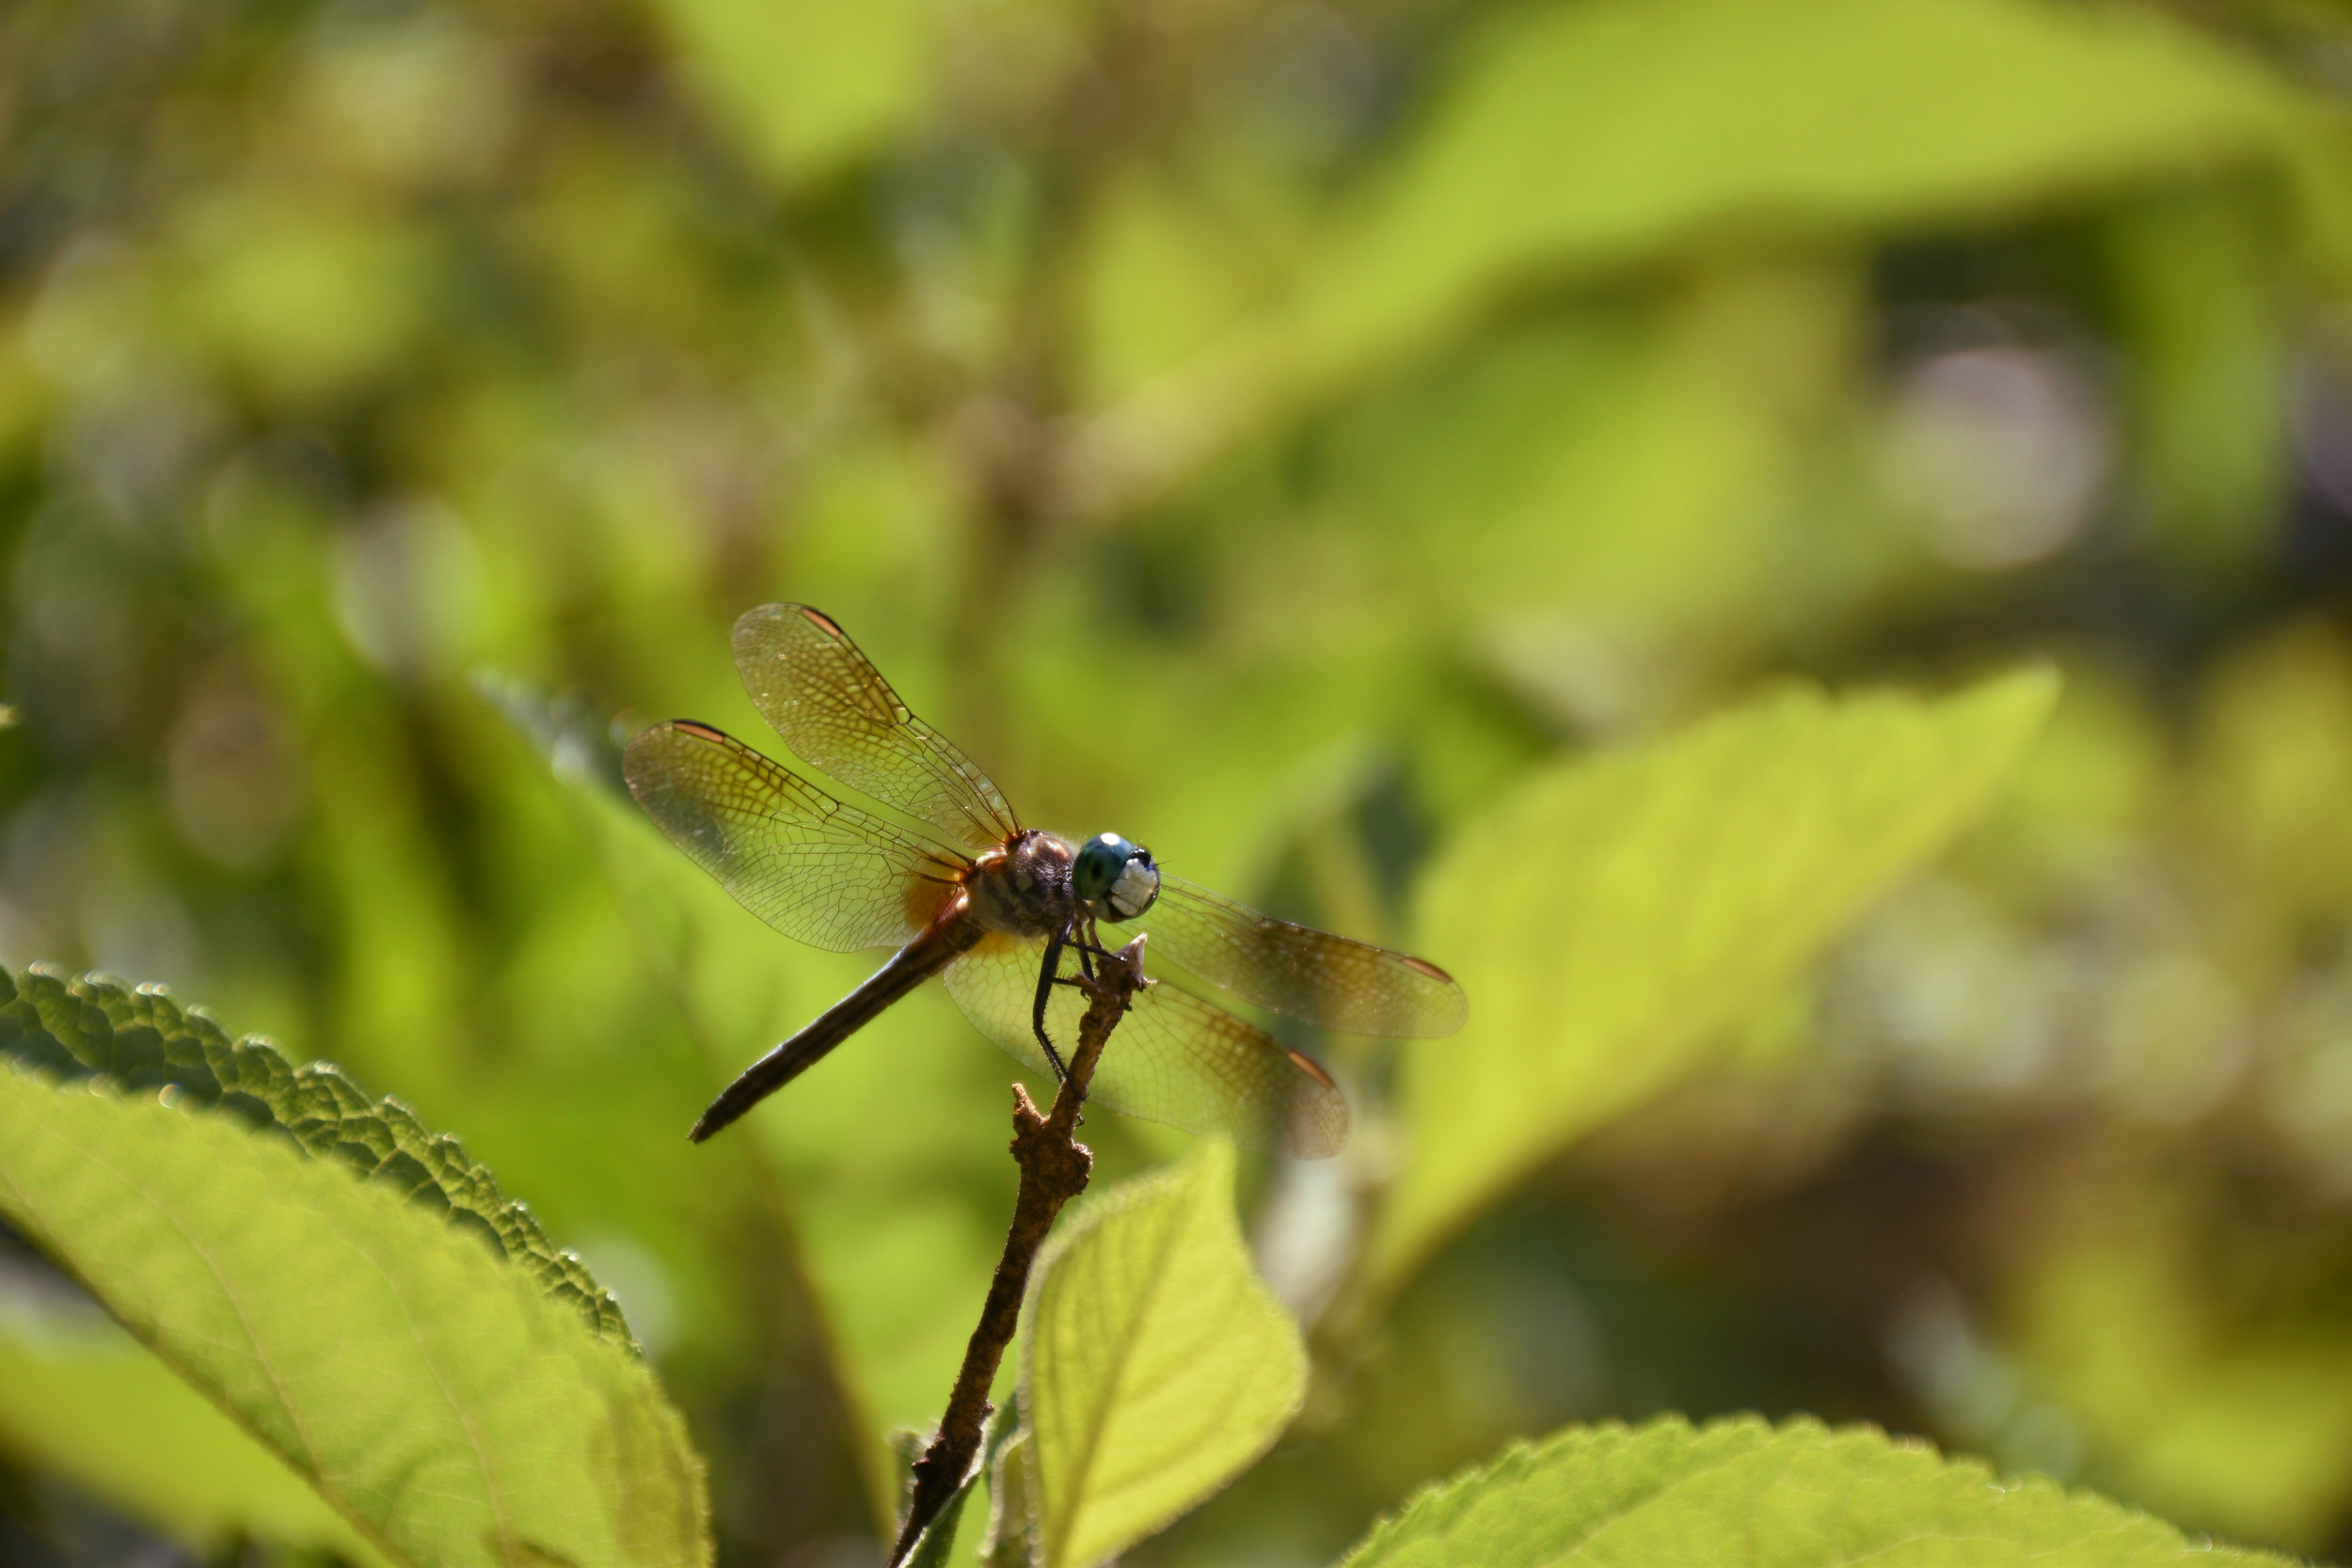 A dragonfly stretches its wings